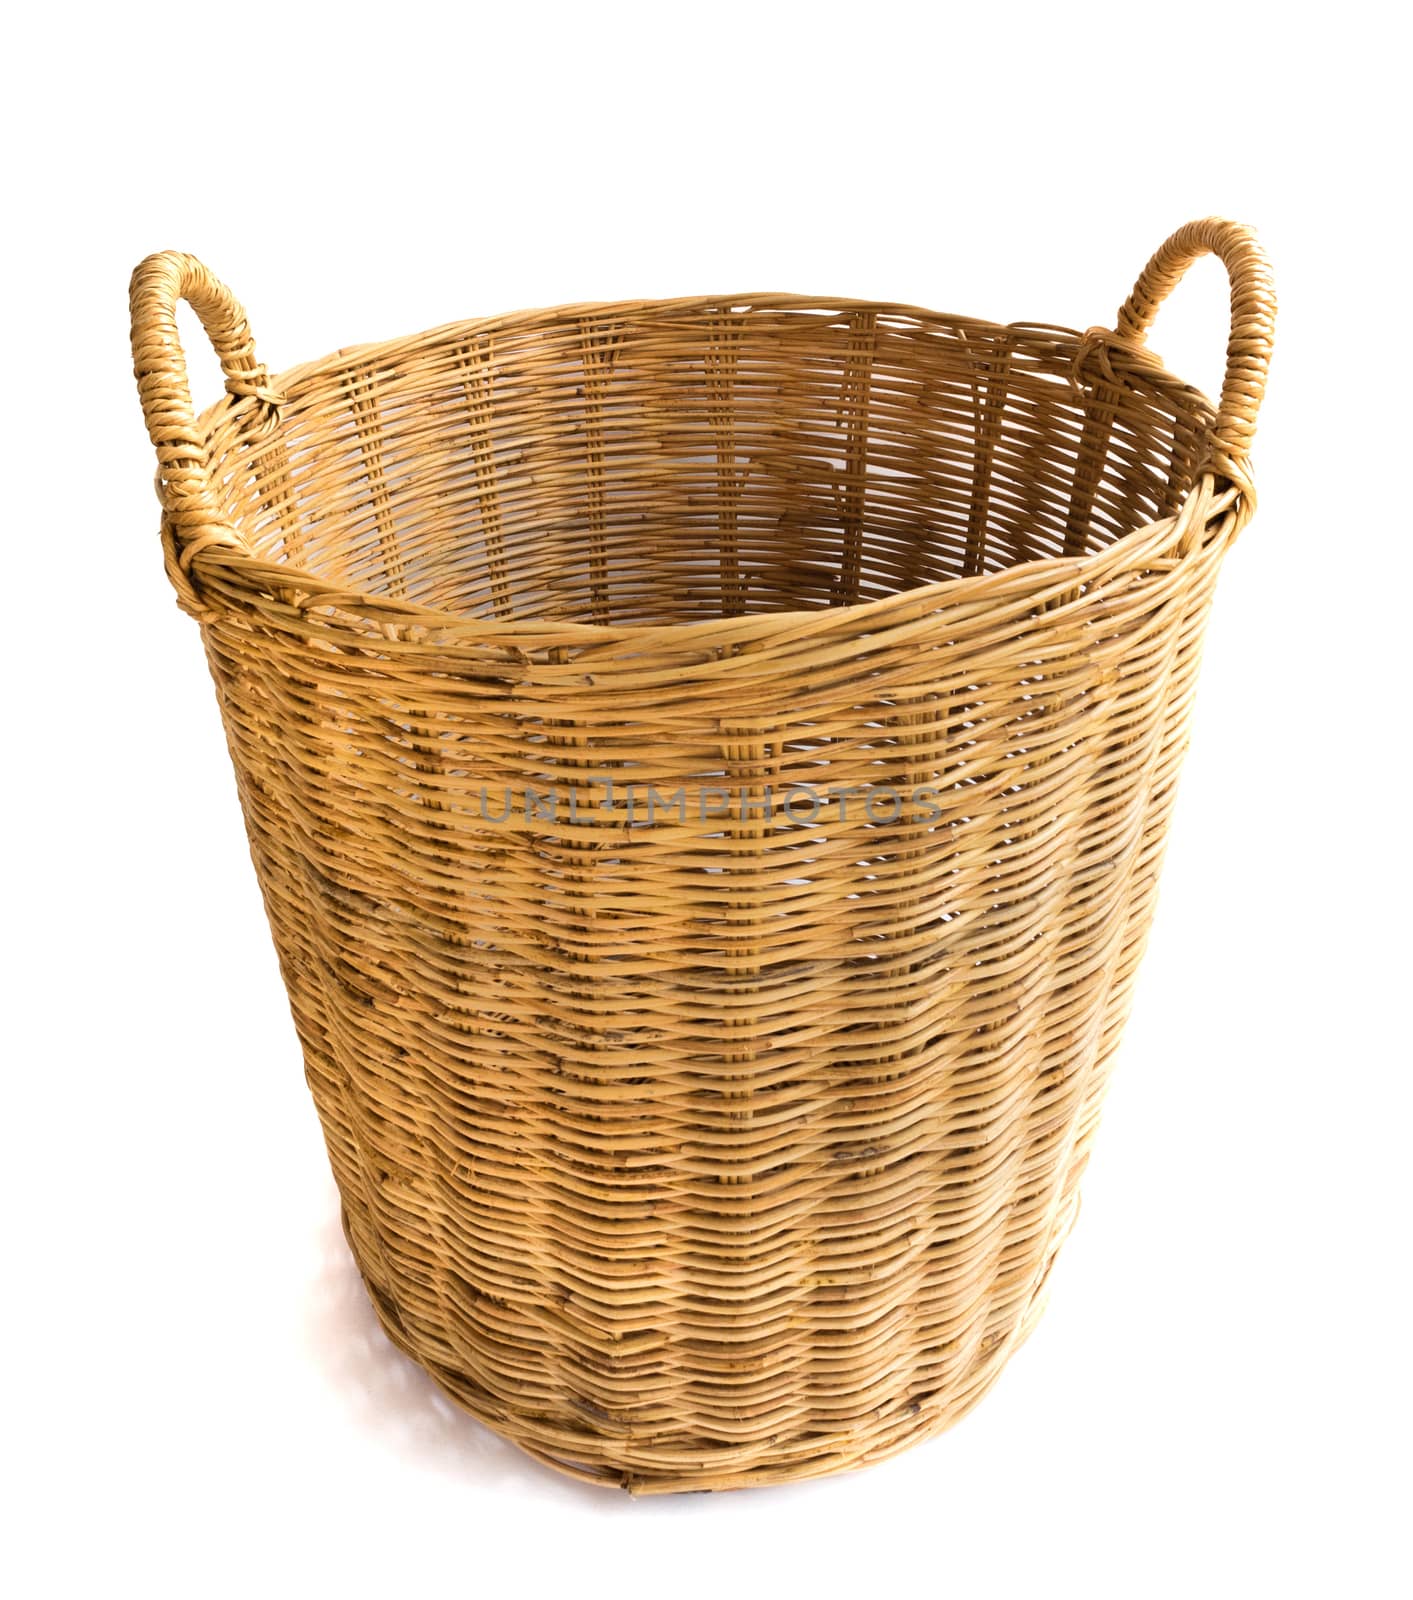 Wicker baskets on white background, workhouse concept by pt.pongsak@gmail.com